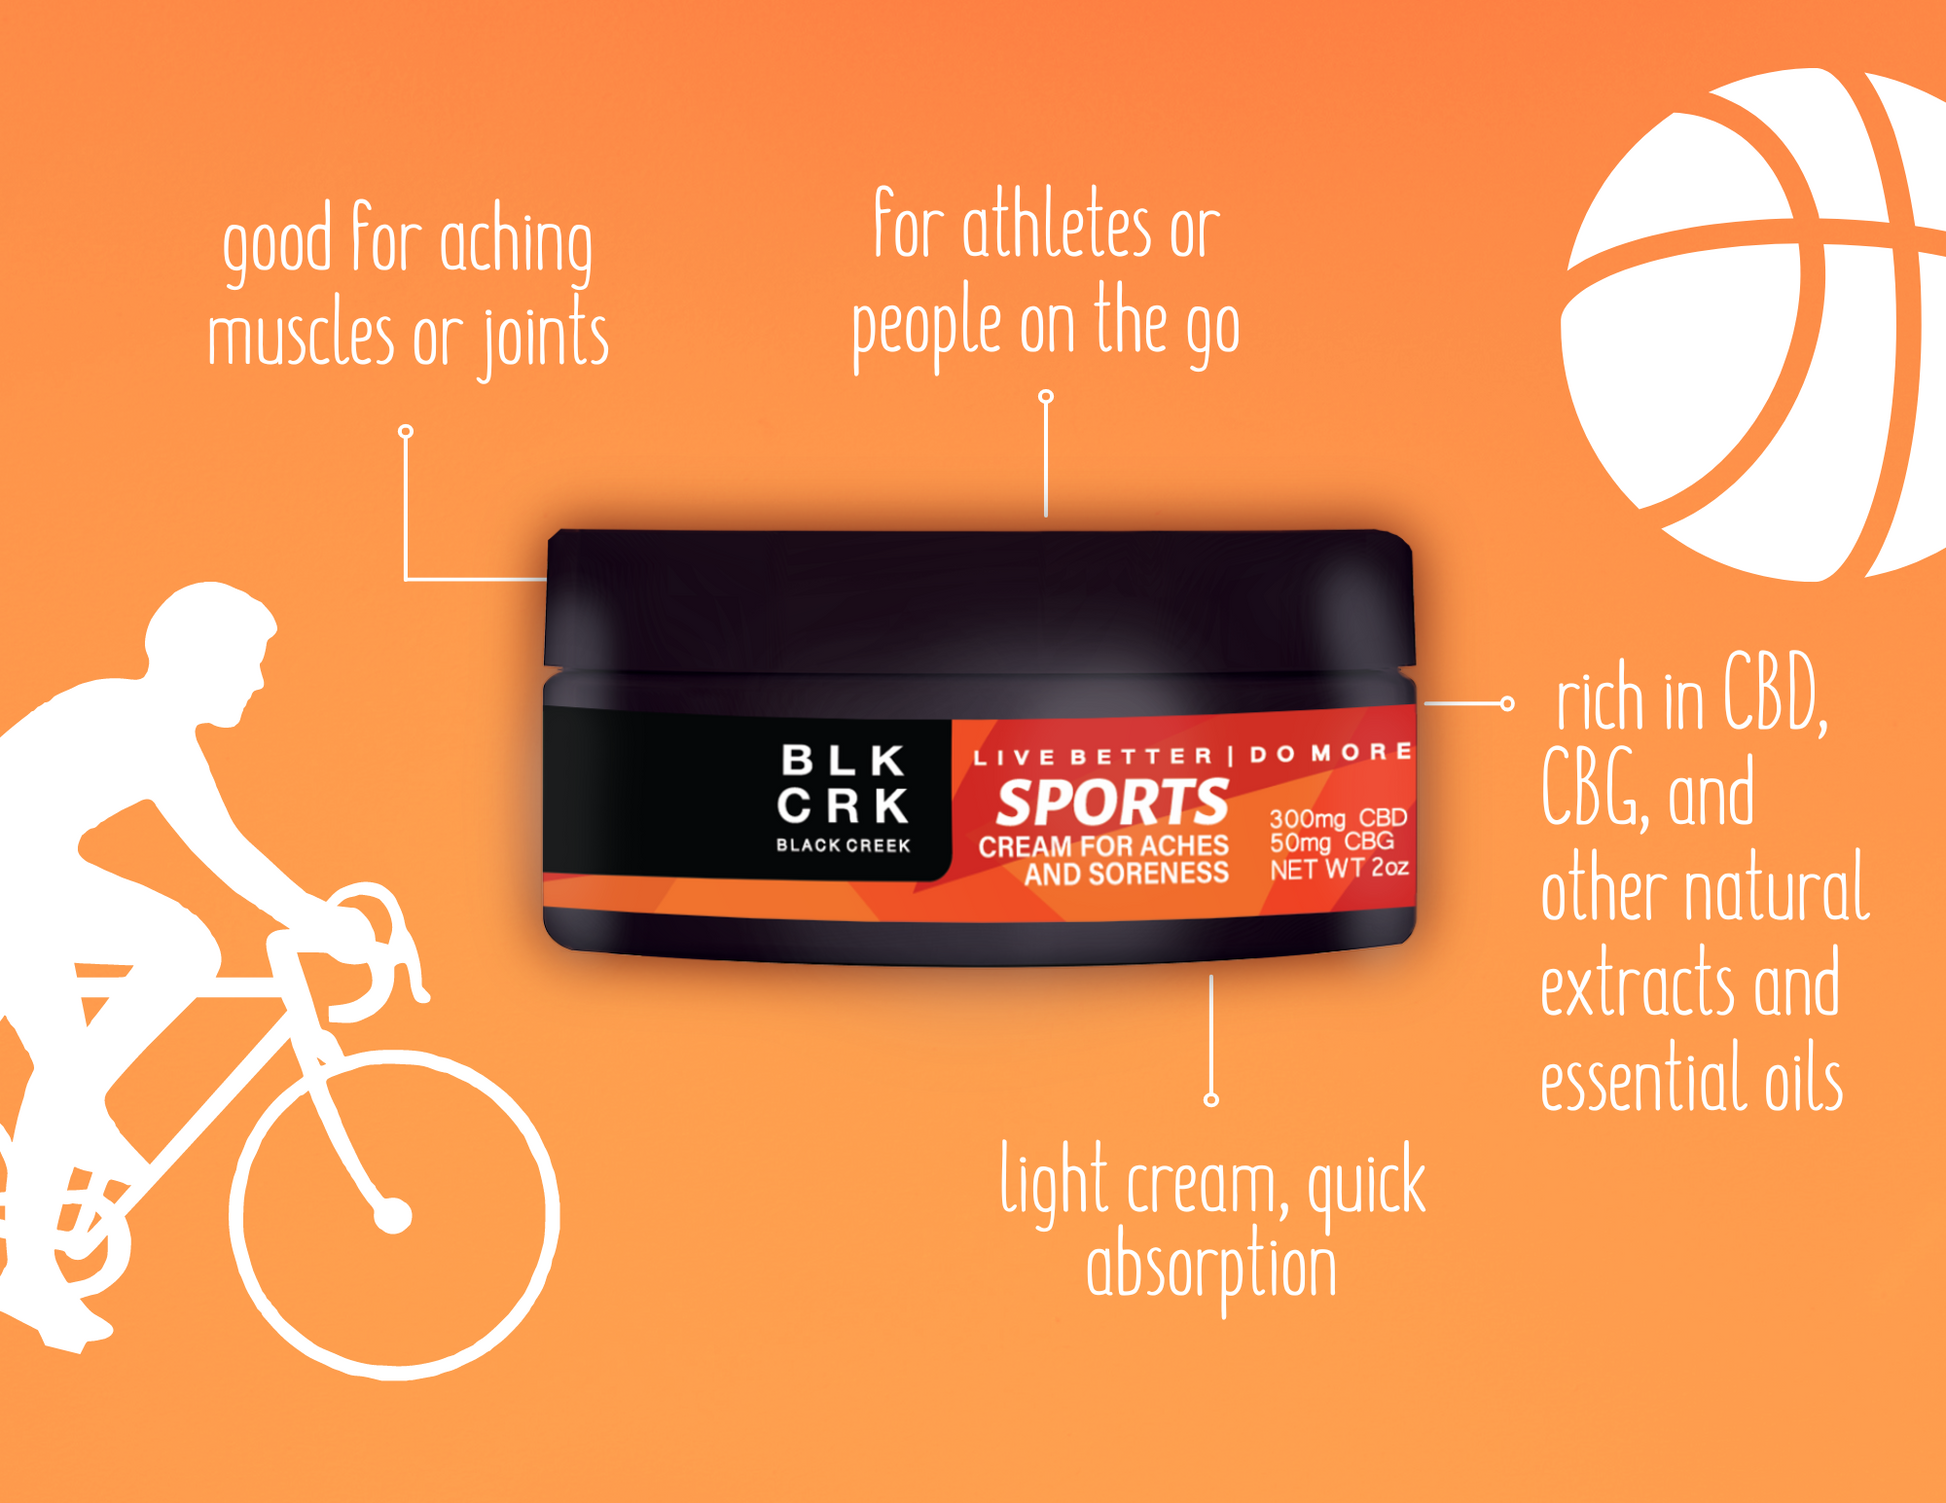 An infographic with the Black Creek CBD Sports cream on an orange background. It reads "good for aching muscles or joints, for athletes or people on the go, rich in CBD, CBG, and other natural extracts and essential oils, light cream, quick absorption." 